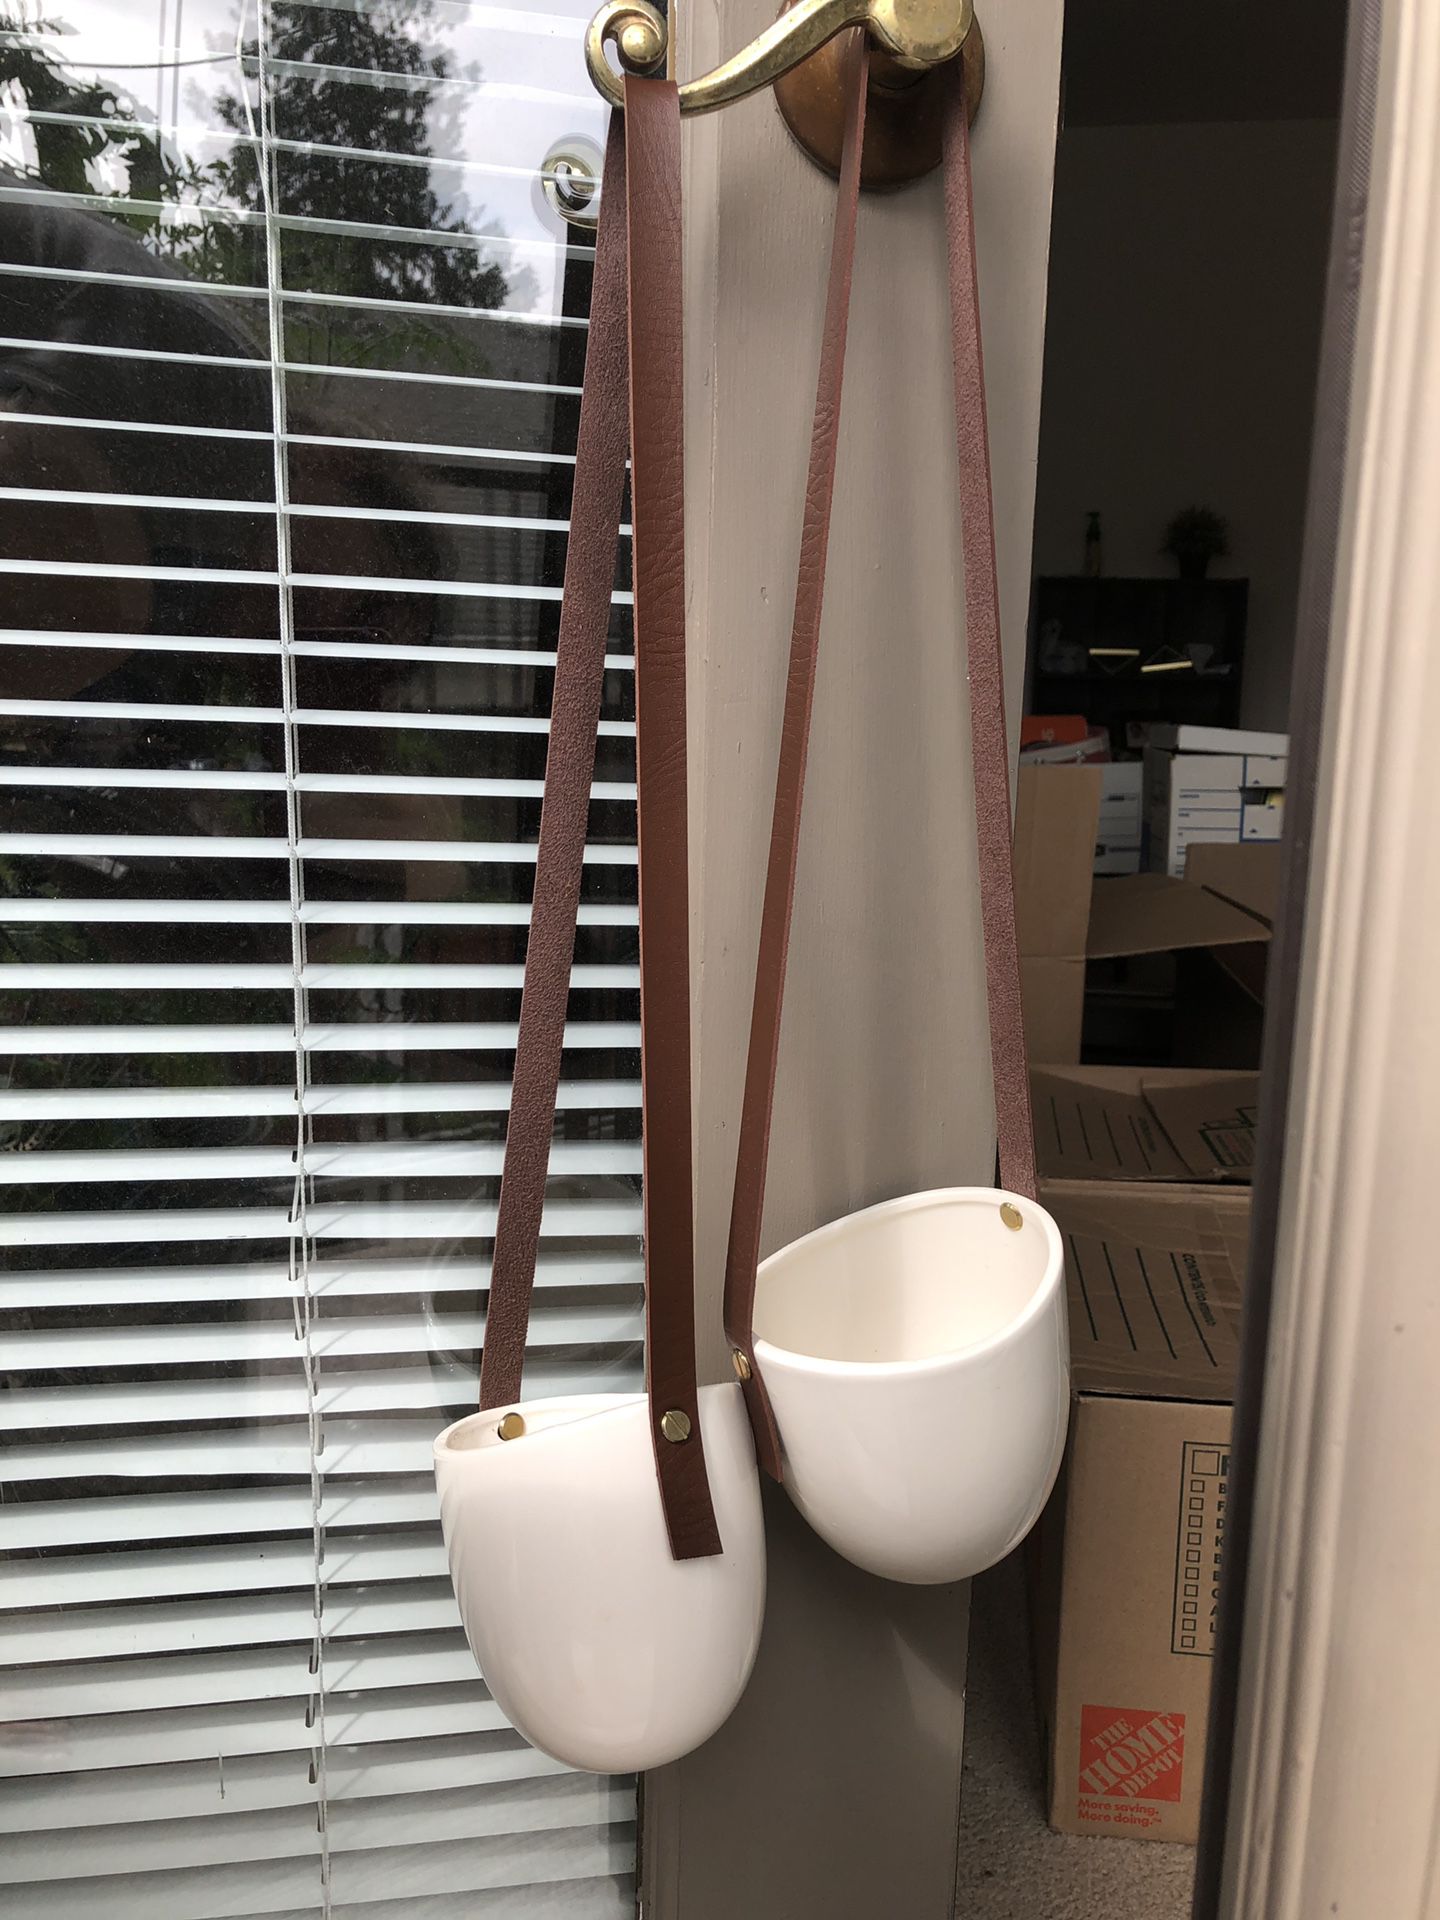 Ceramic hanging pots-5” opening-leather strap